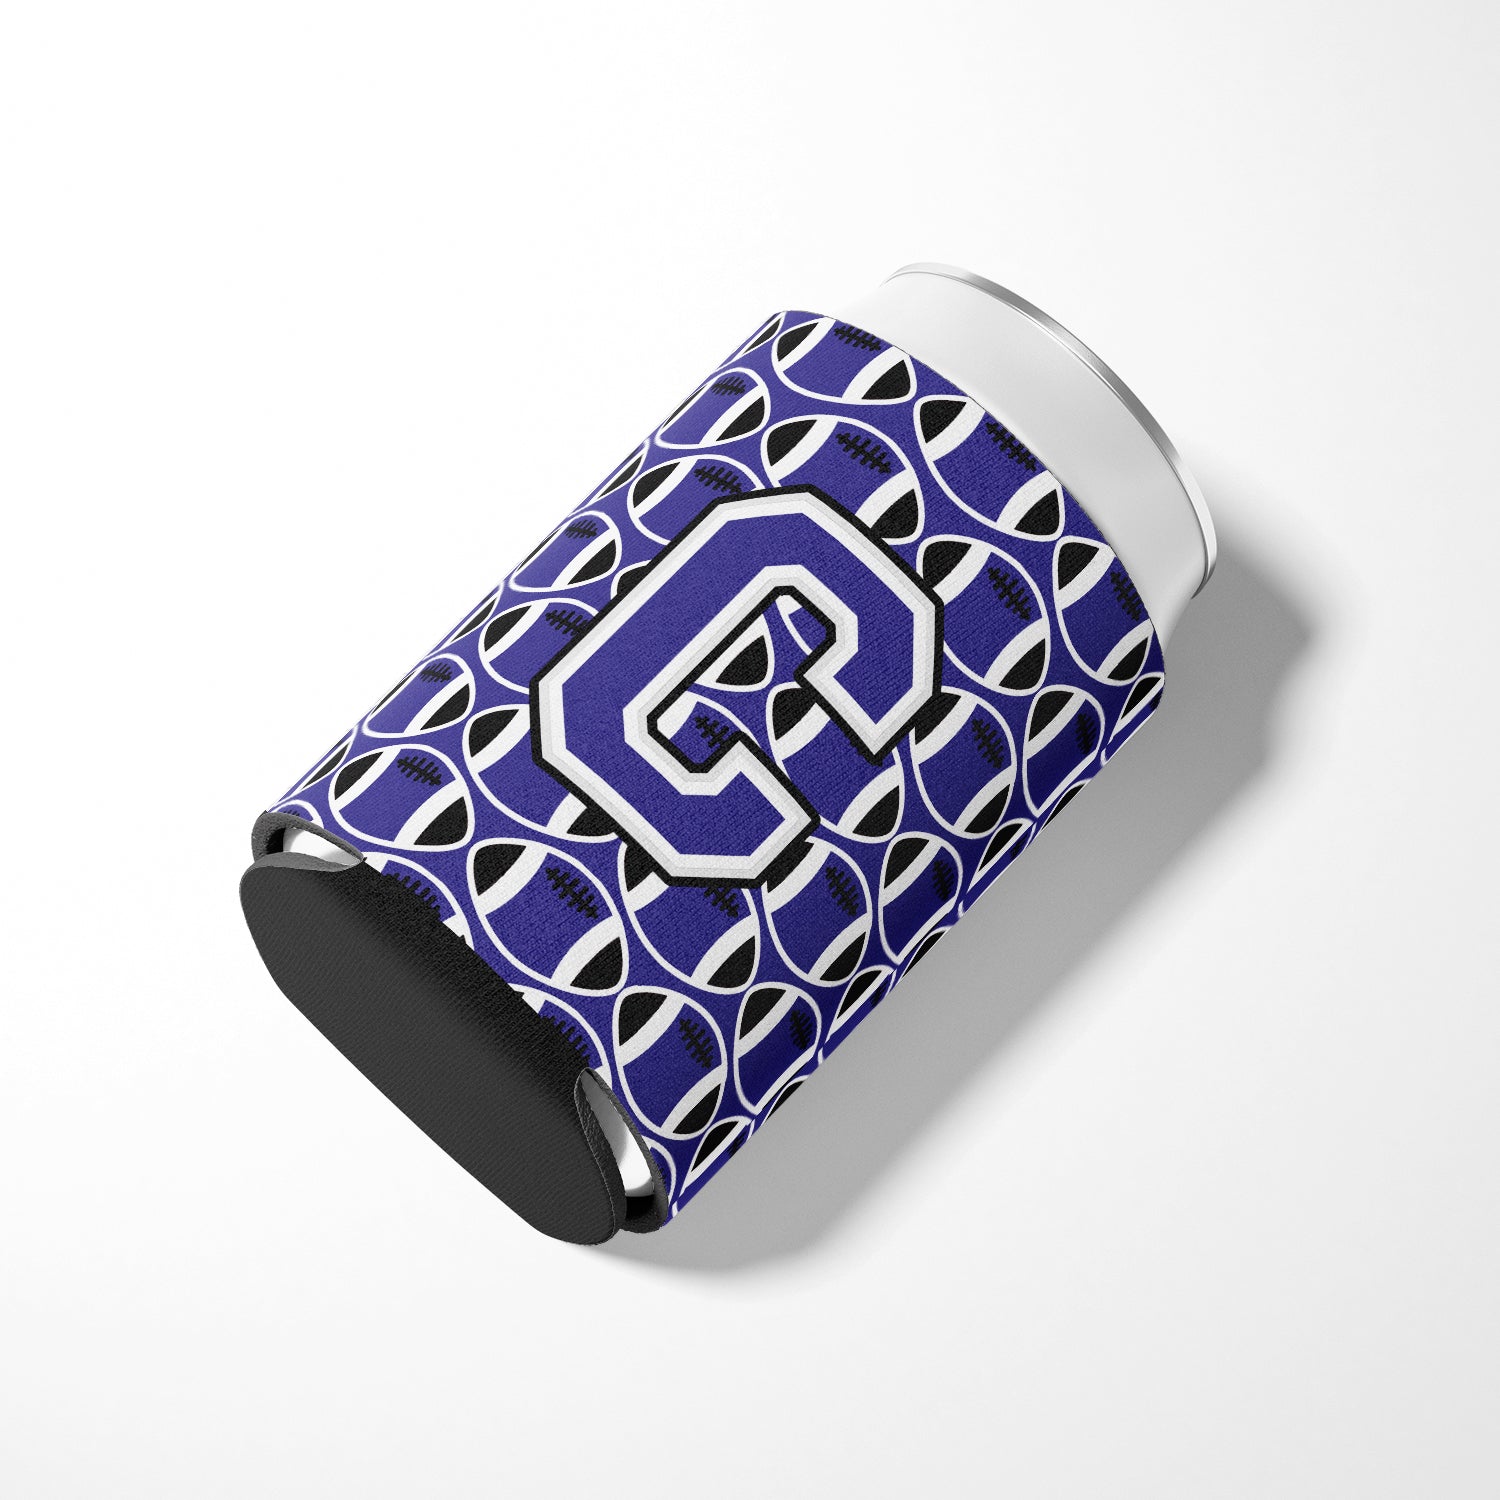 Letter C Football Purple and White Can or Bottle Hugger CJ1068-CCC